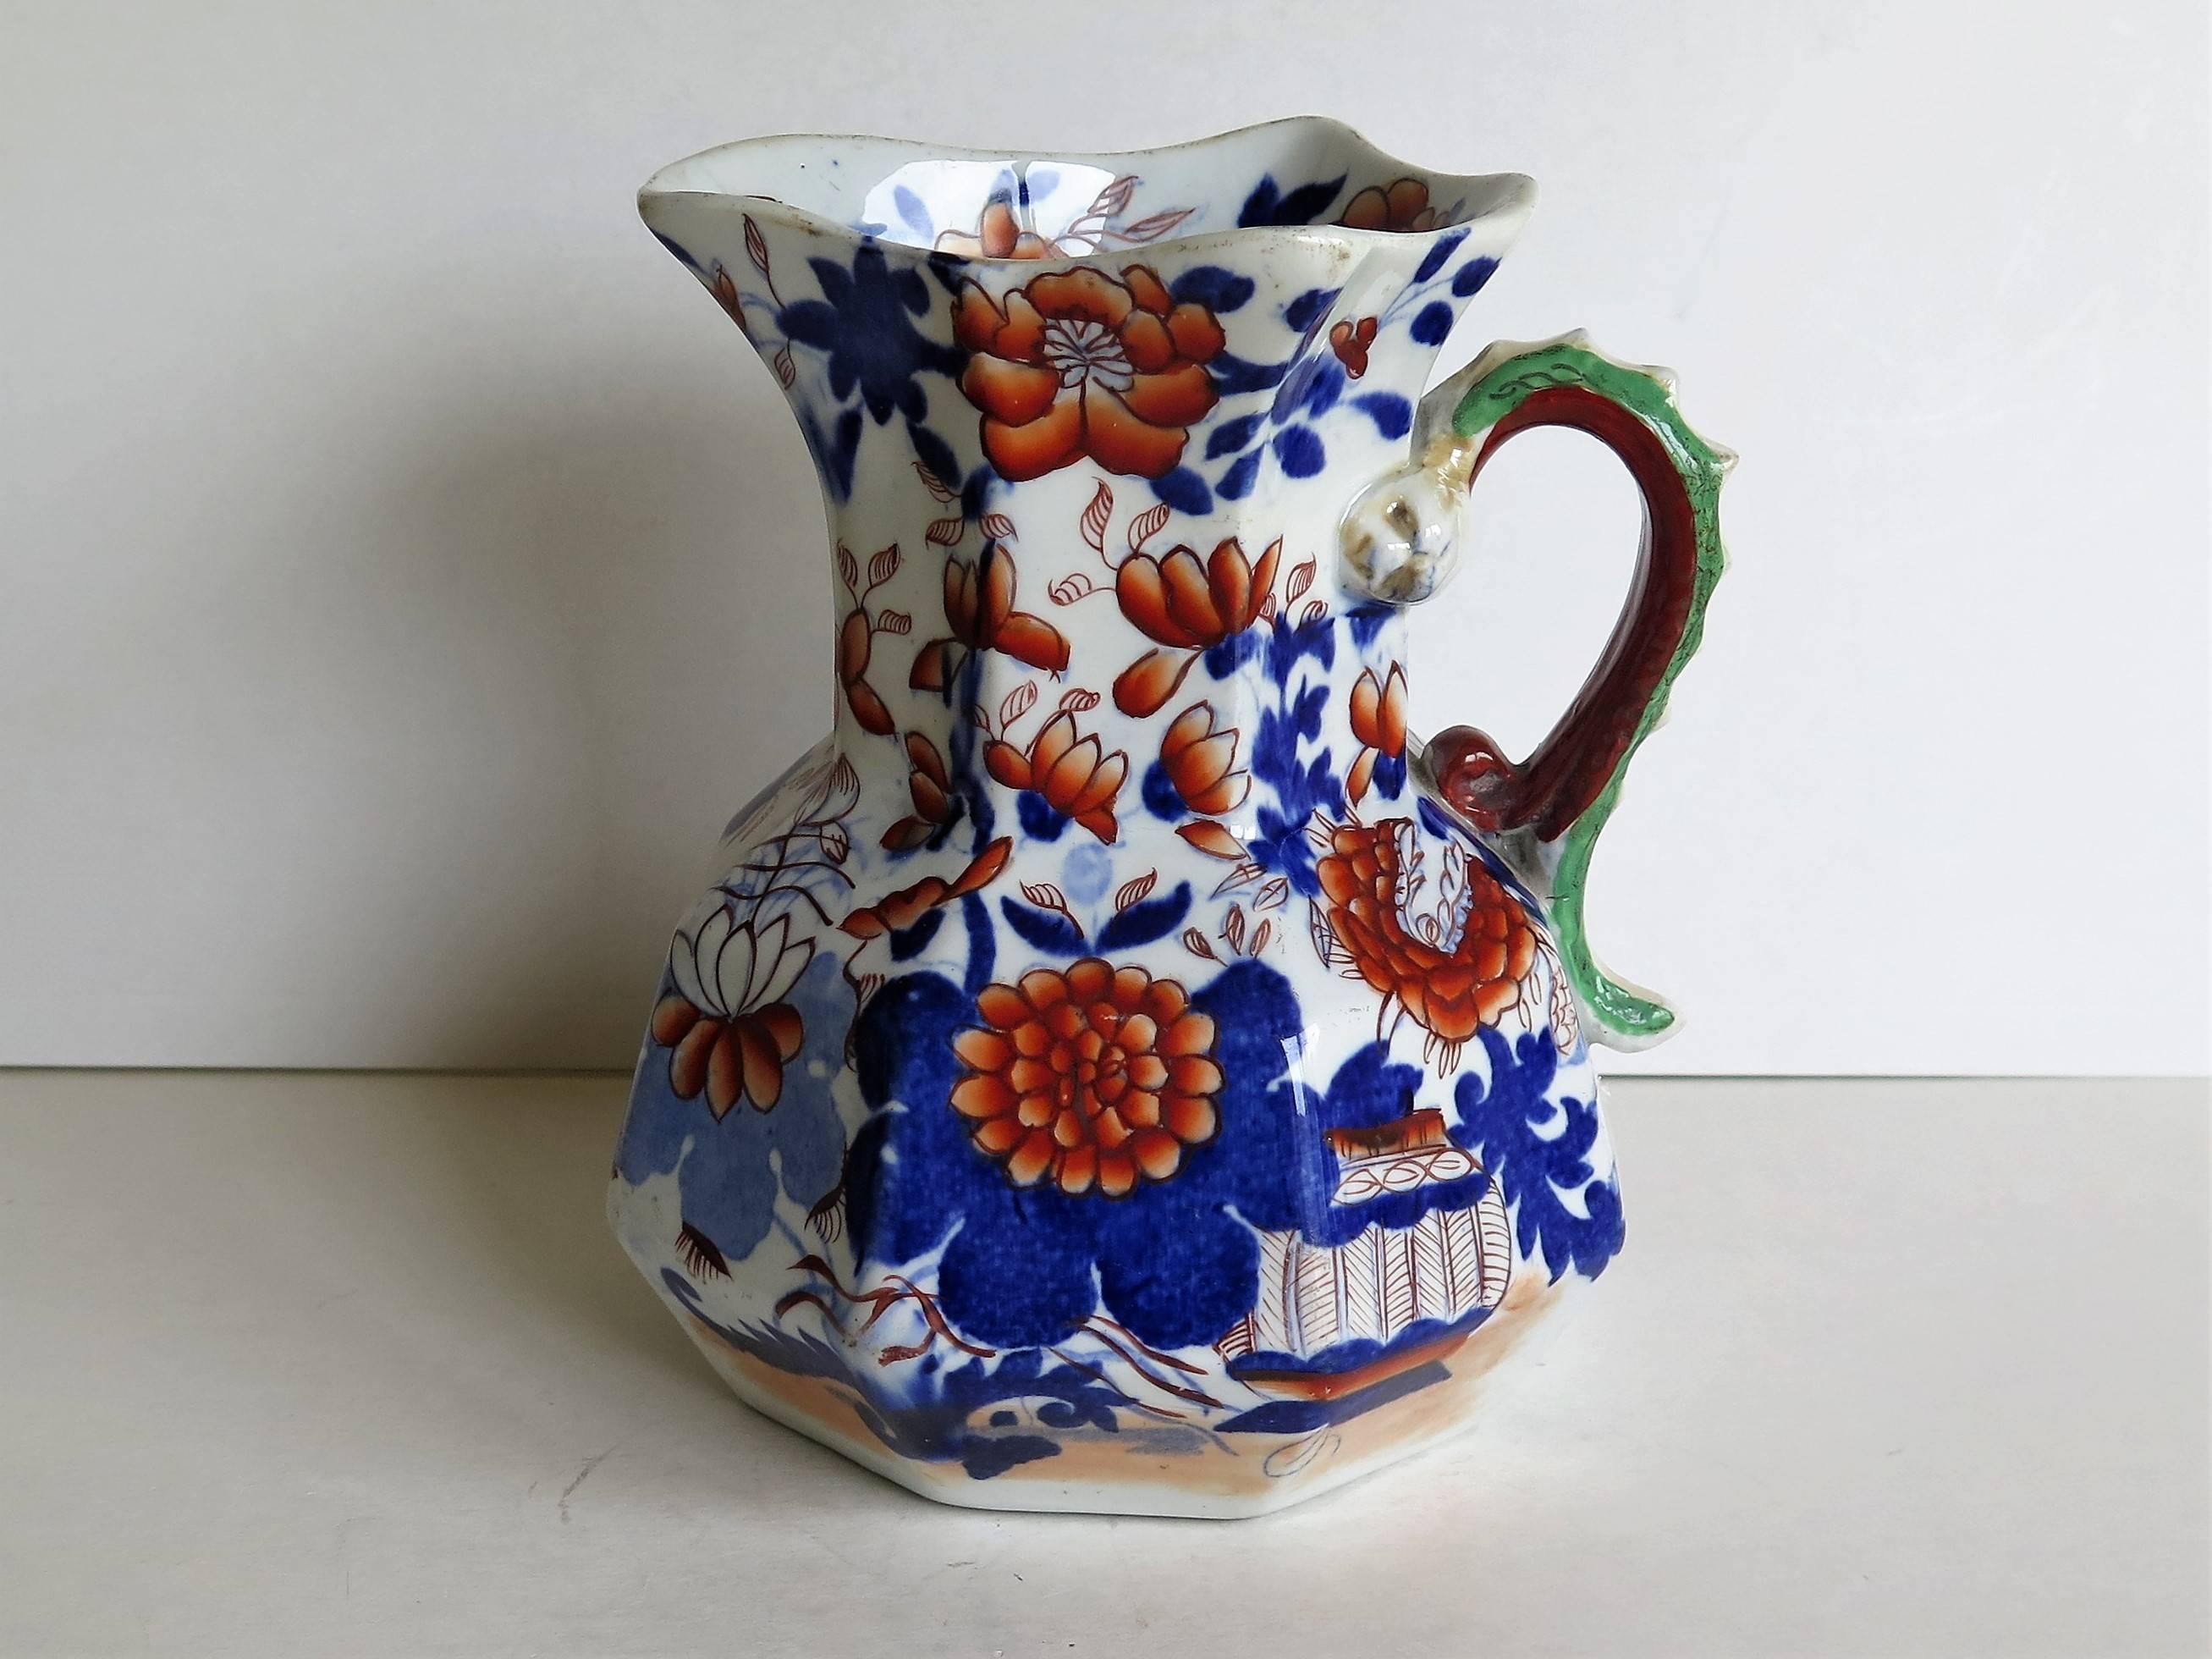 This is a very good, early Mason's Ironstone hydra jug in the Japan Basket pattern, circa 1820. 

The jug has an octagonal shape with a notched snake handle and is decorated in the distinctive Japan Basket pattern, which is one of Mason's well